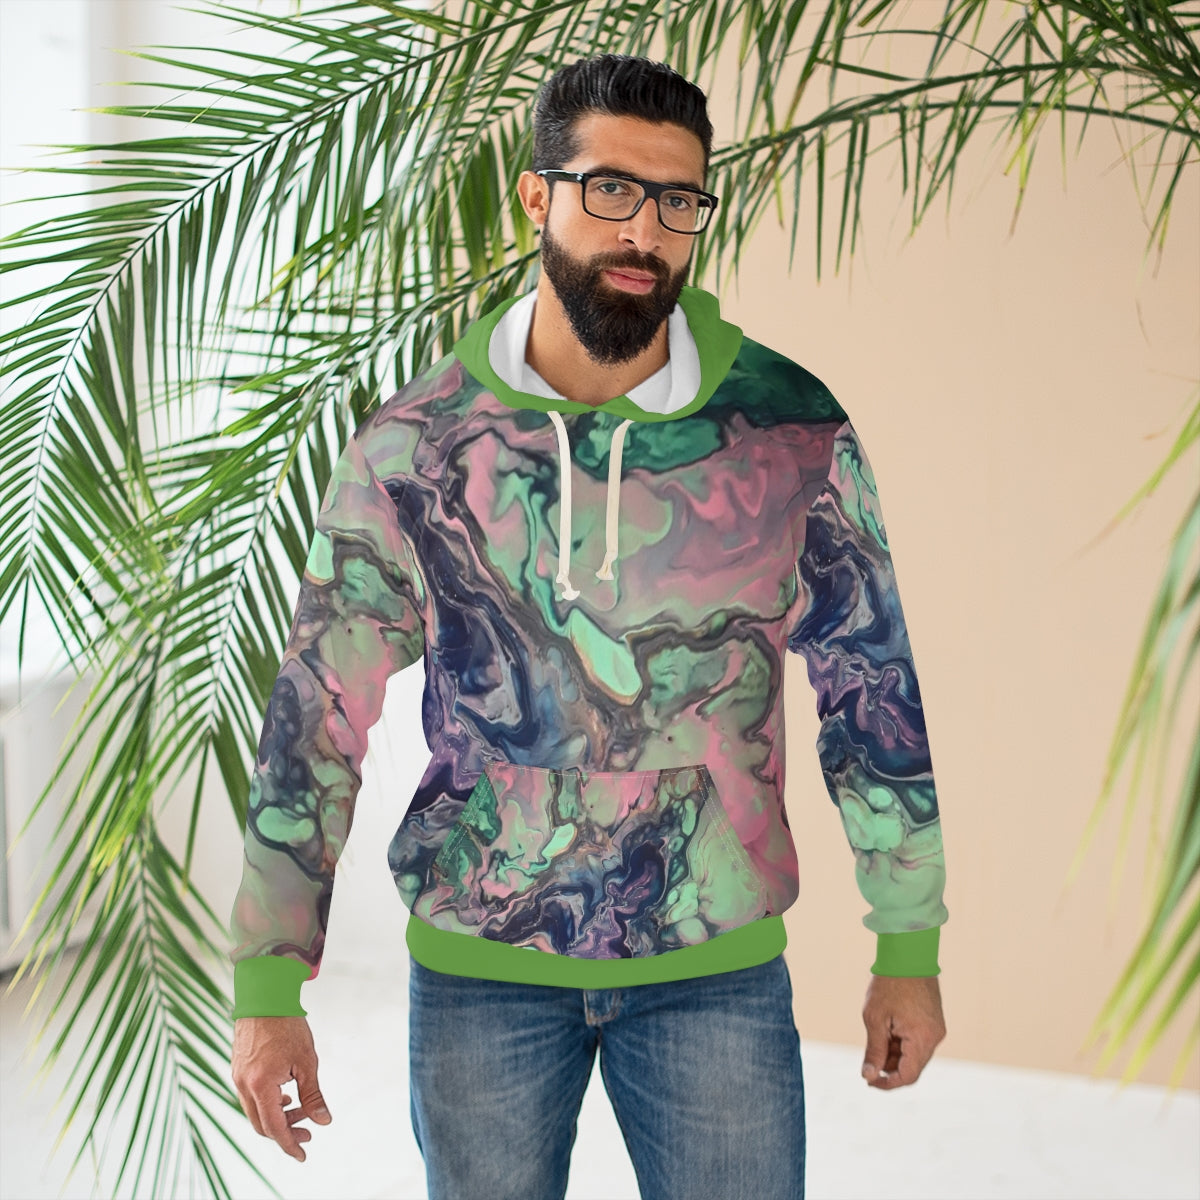 ALL OVER PRINT PUULOVER HOODIE, ABSTRART ART PRINTED HOODIE FOR MEN AND WOMEN